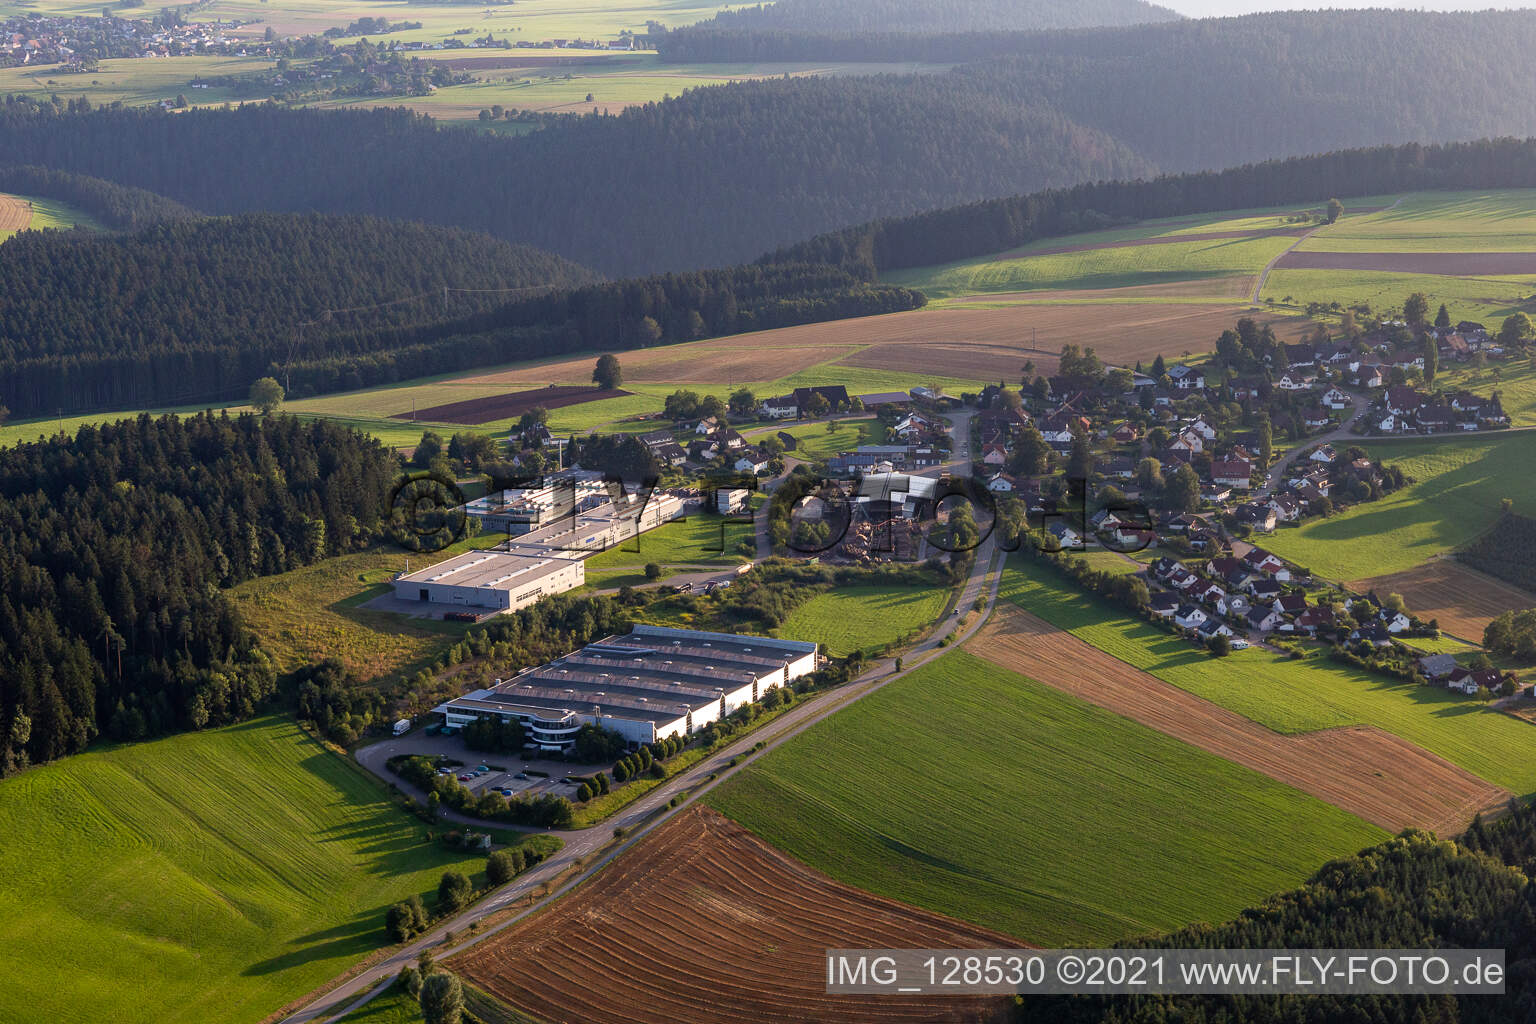 Company grounds and facilities of A.I.T. Metallbearbeitung GmbH & Co. KG in Alpirsbach in the state Baden-Wuerttemberg, Germany